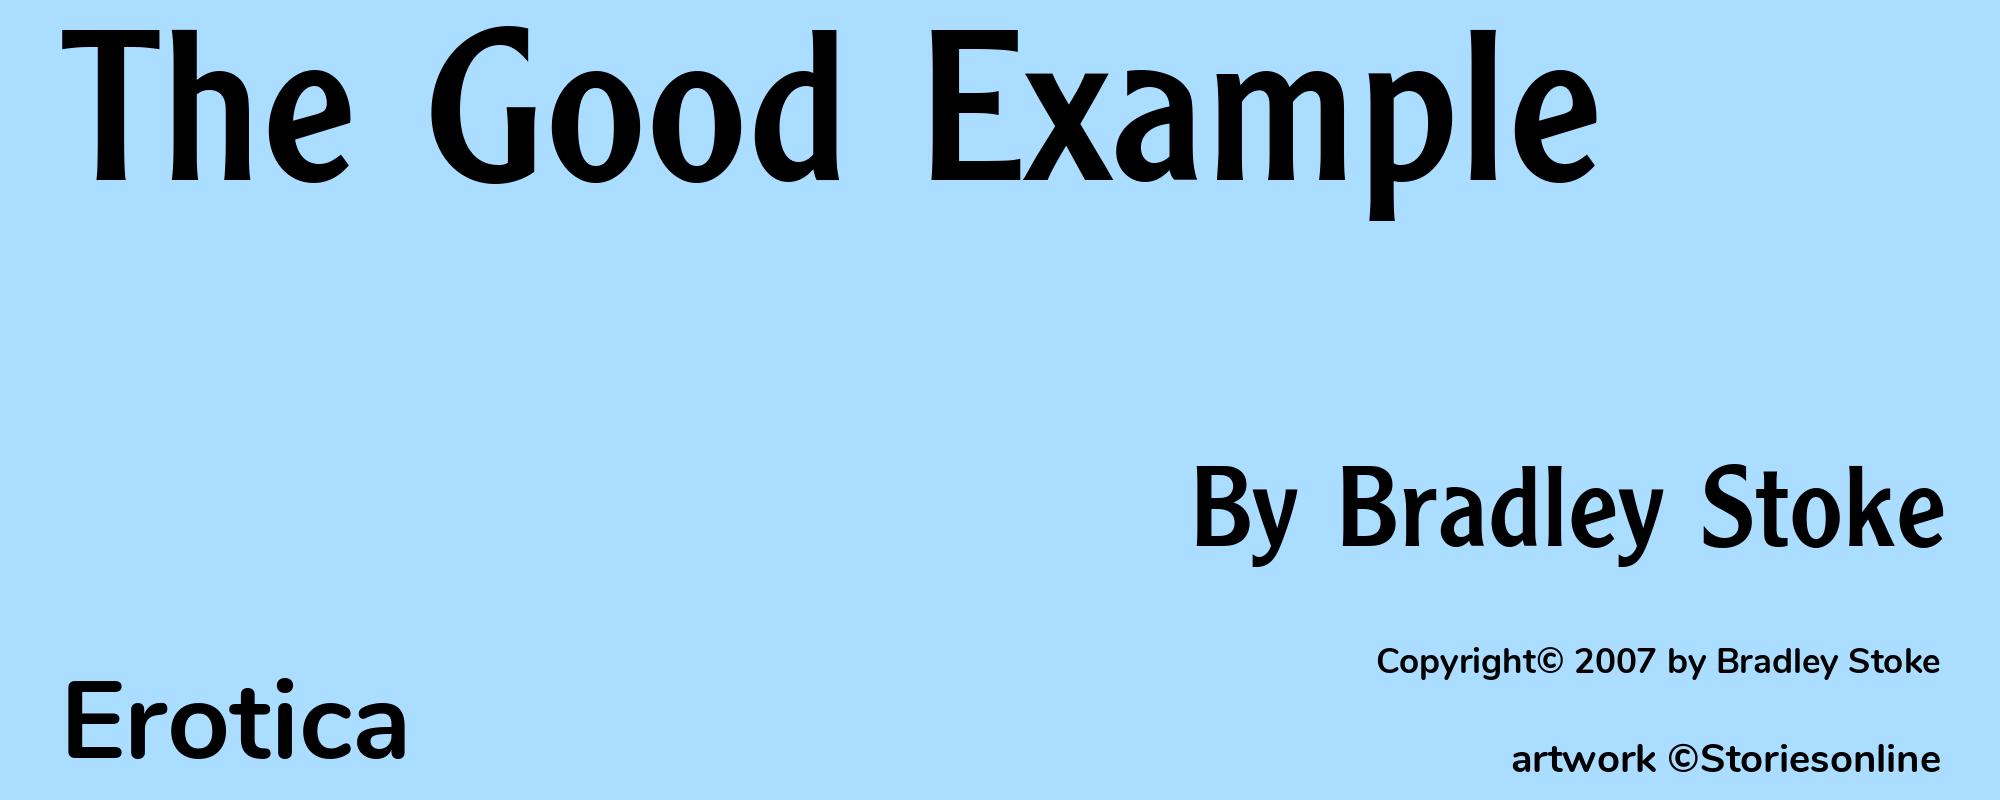 The Good Example - Cover